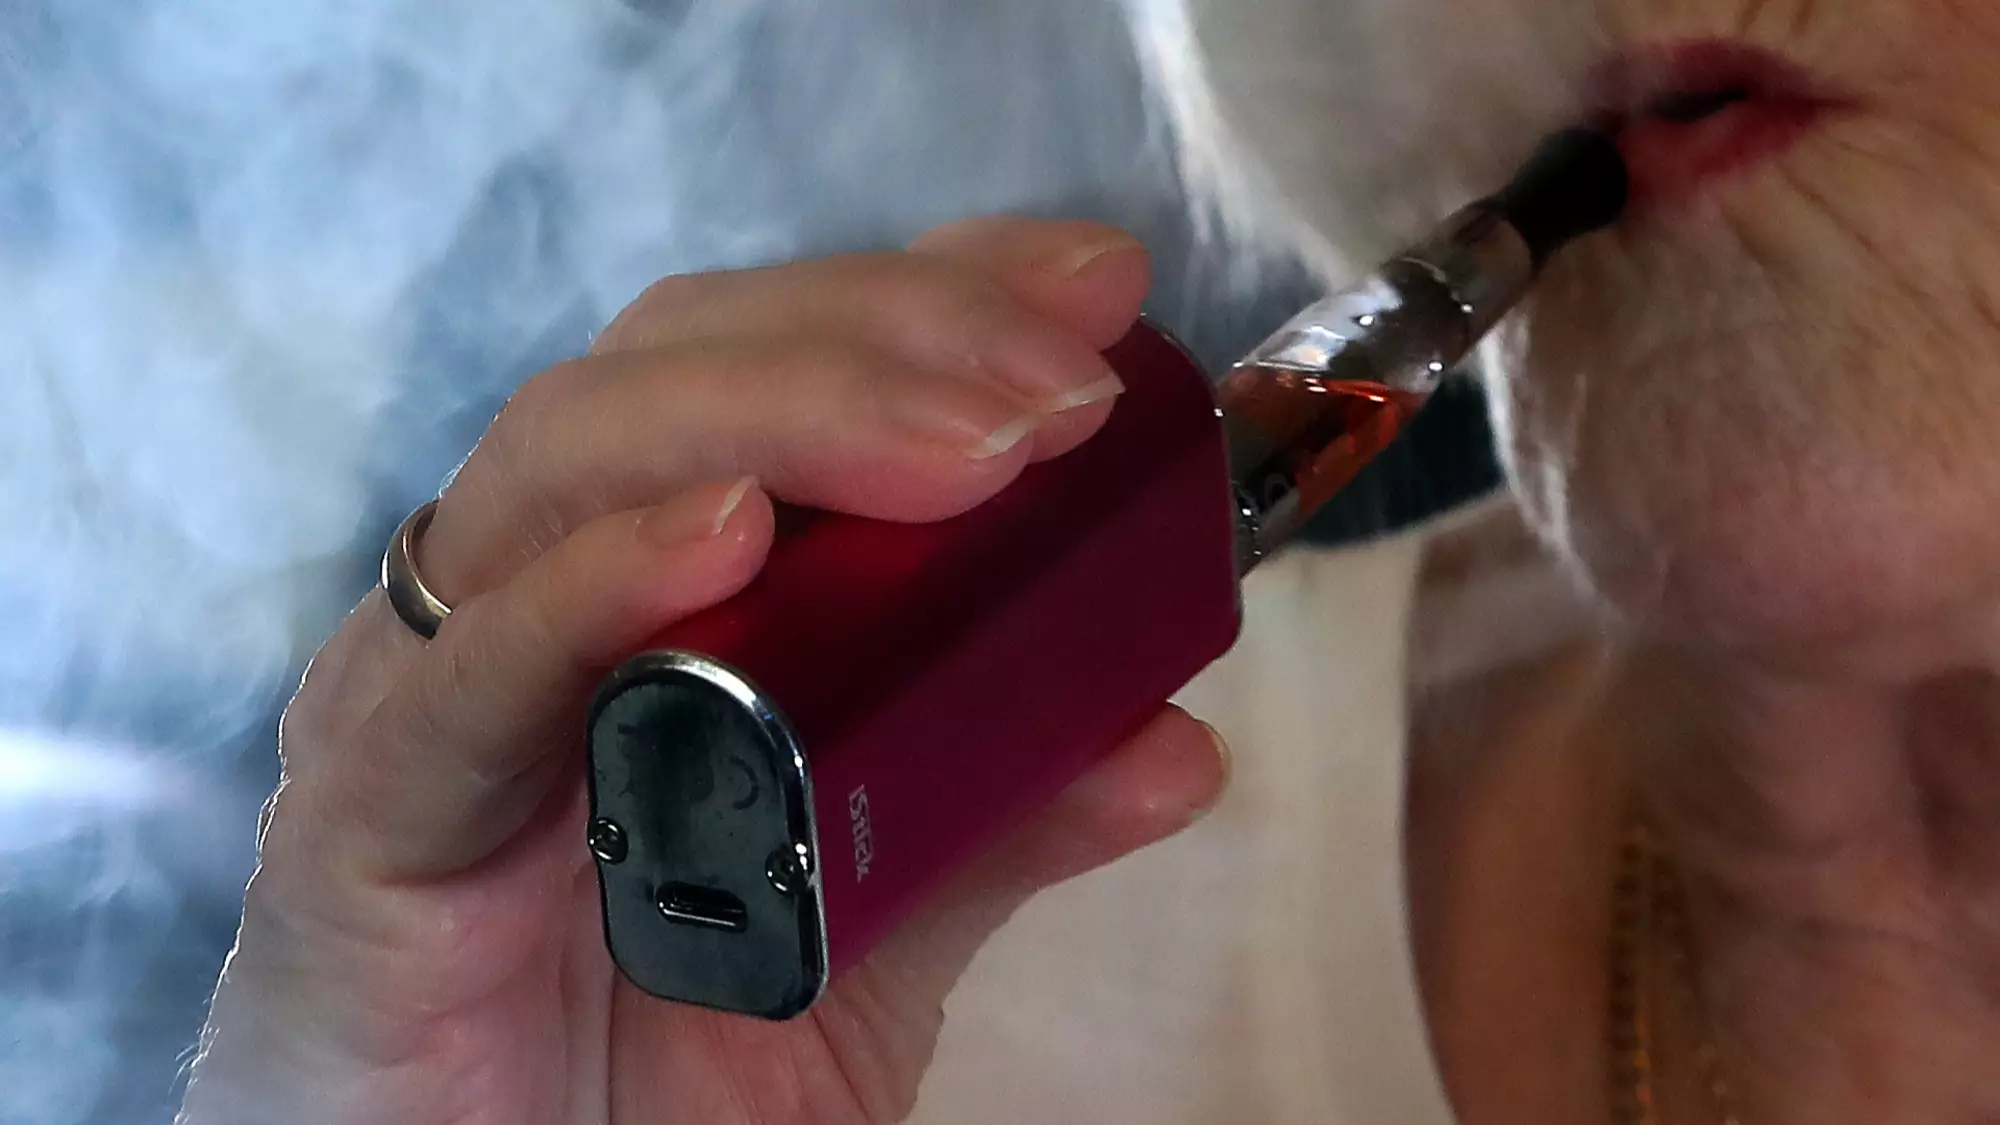 San Francisco Becomes The First US City To Ban E-Cigarette Products